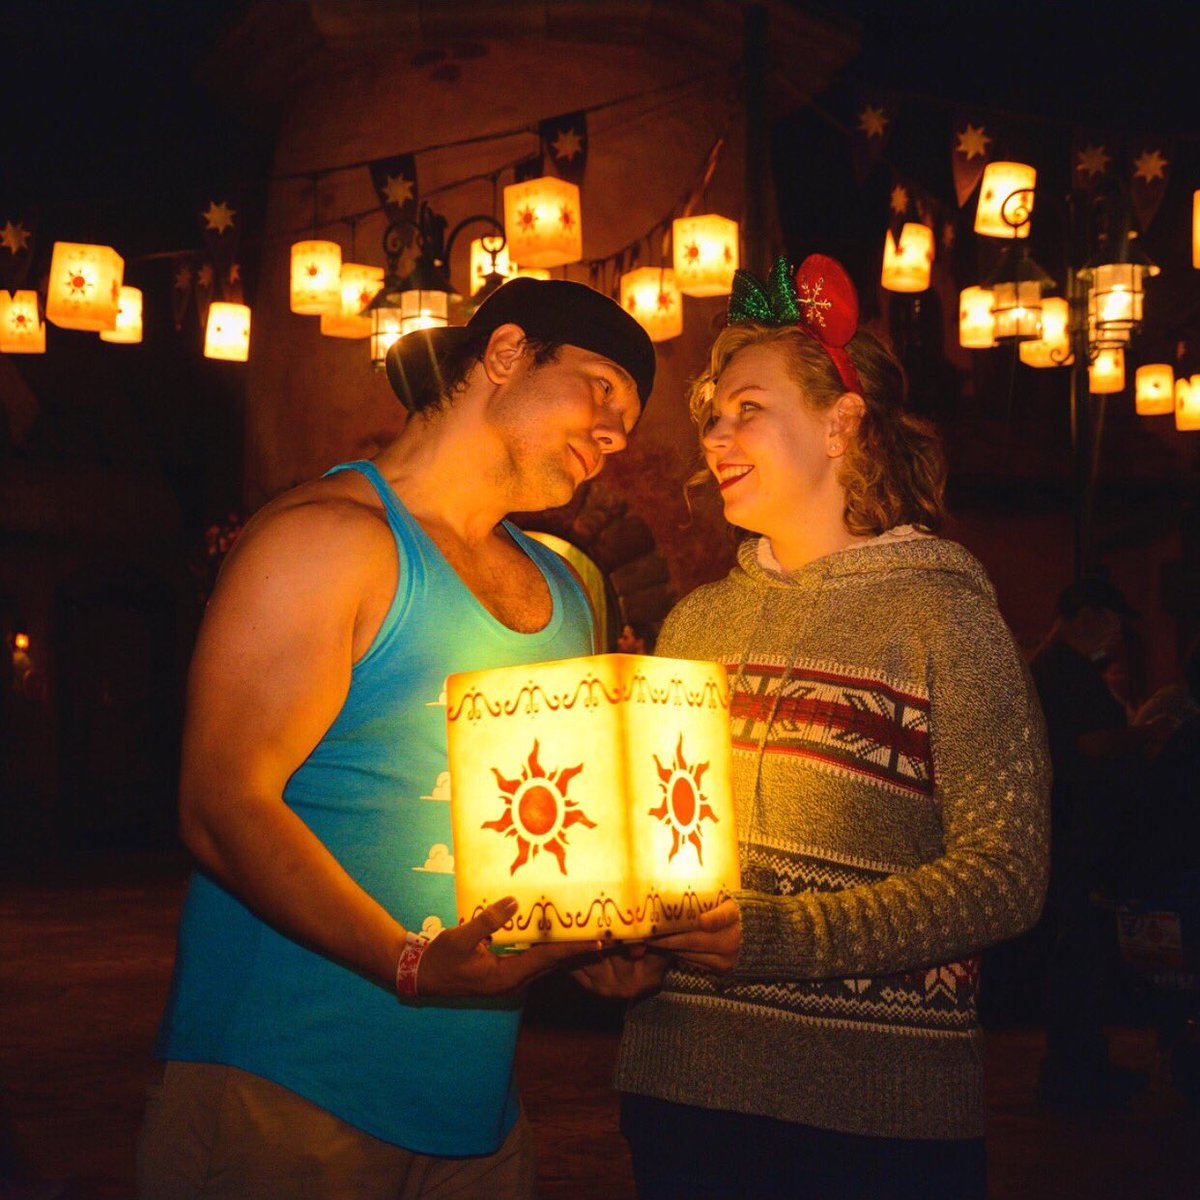 We Write Our Own Destinies. We Write Our Own Love Stories. And Ours Is Filled With Magic, Disney, & Watching The Floating Lanterns Gleam. ✨❤️✨ #WaltDisneyWorld #Disney #TuckAndRachel #FloatingLanterns